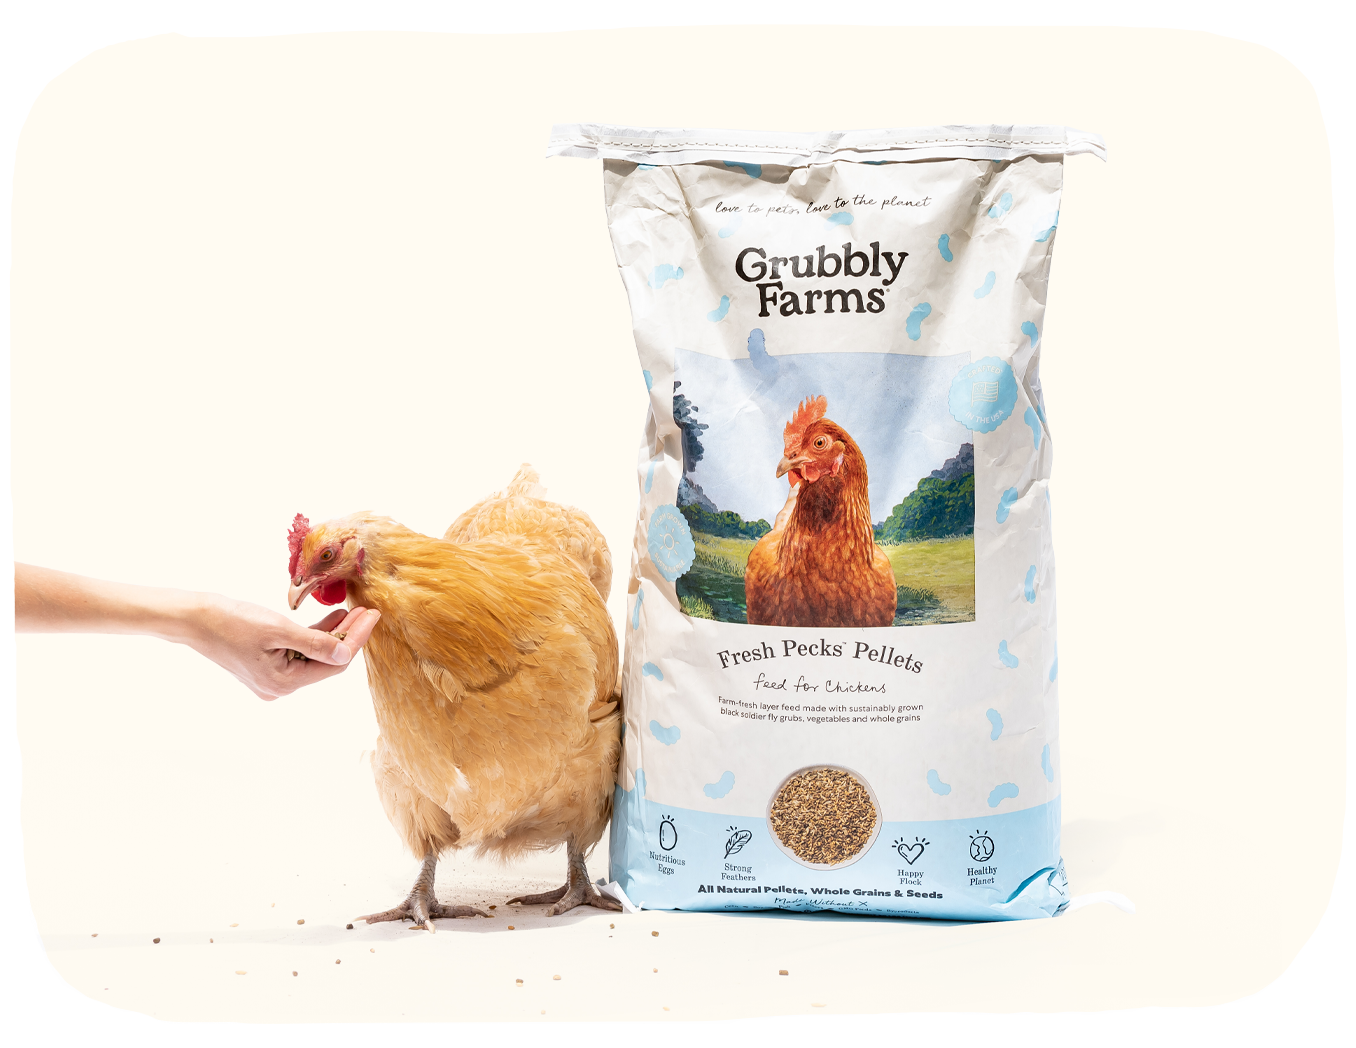 A chicken eating from a person's hand beside a bag of chicken feed.